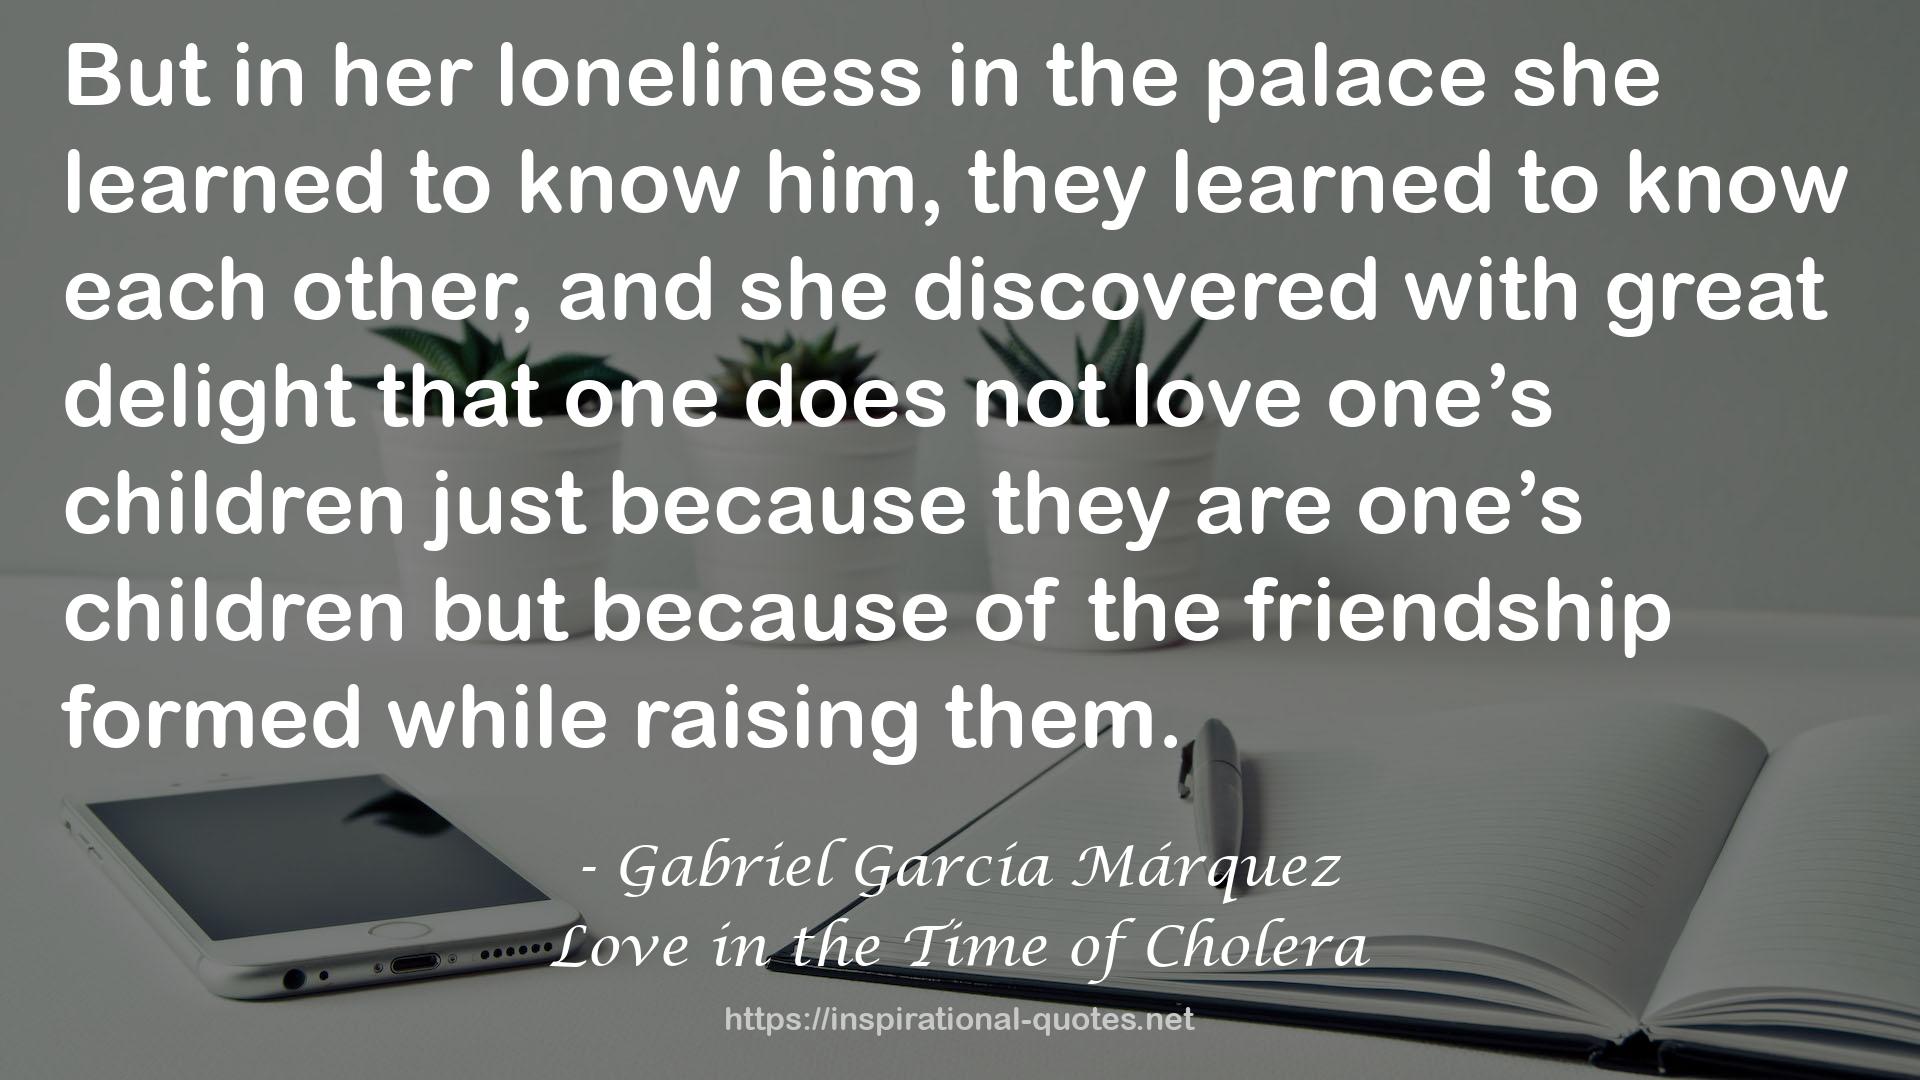 her loneliness  QUOTES